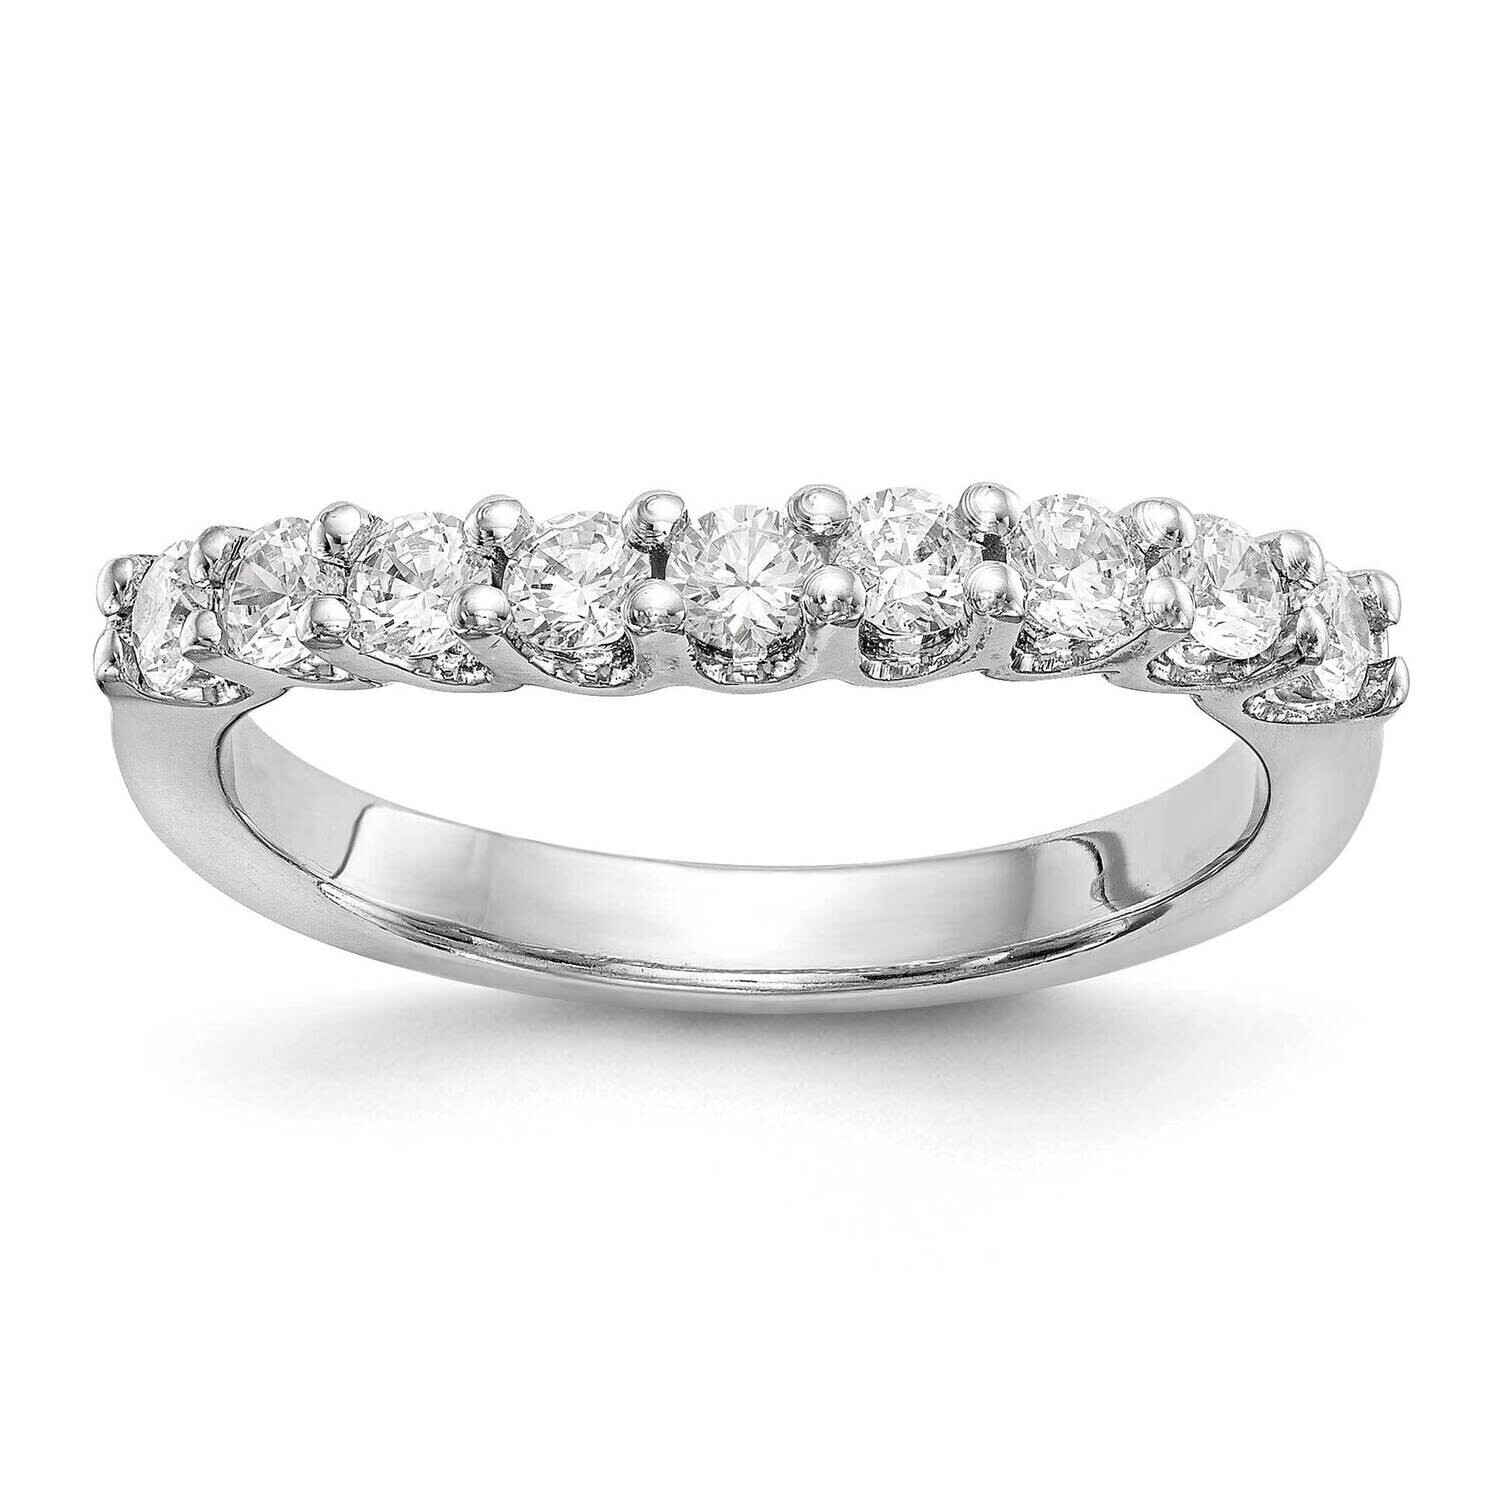 9-Stone Shared Prong Holds 9-2.9mm Round Diamond Band Ring Mounting 14k White Gold RM3190B-090-WAA